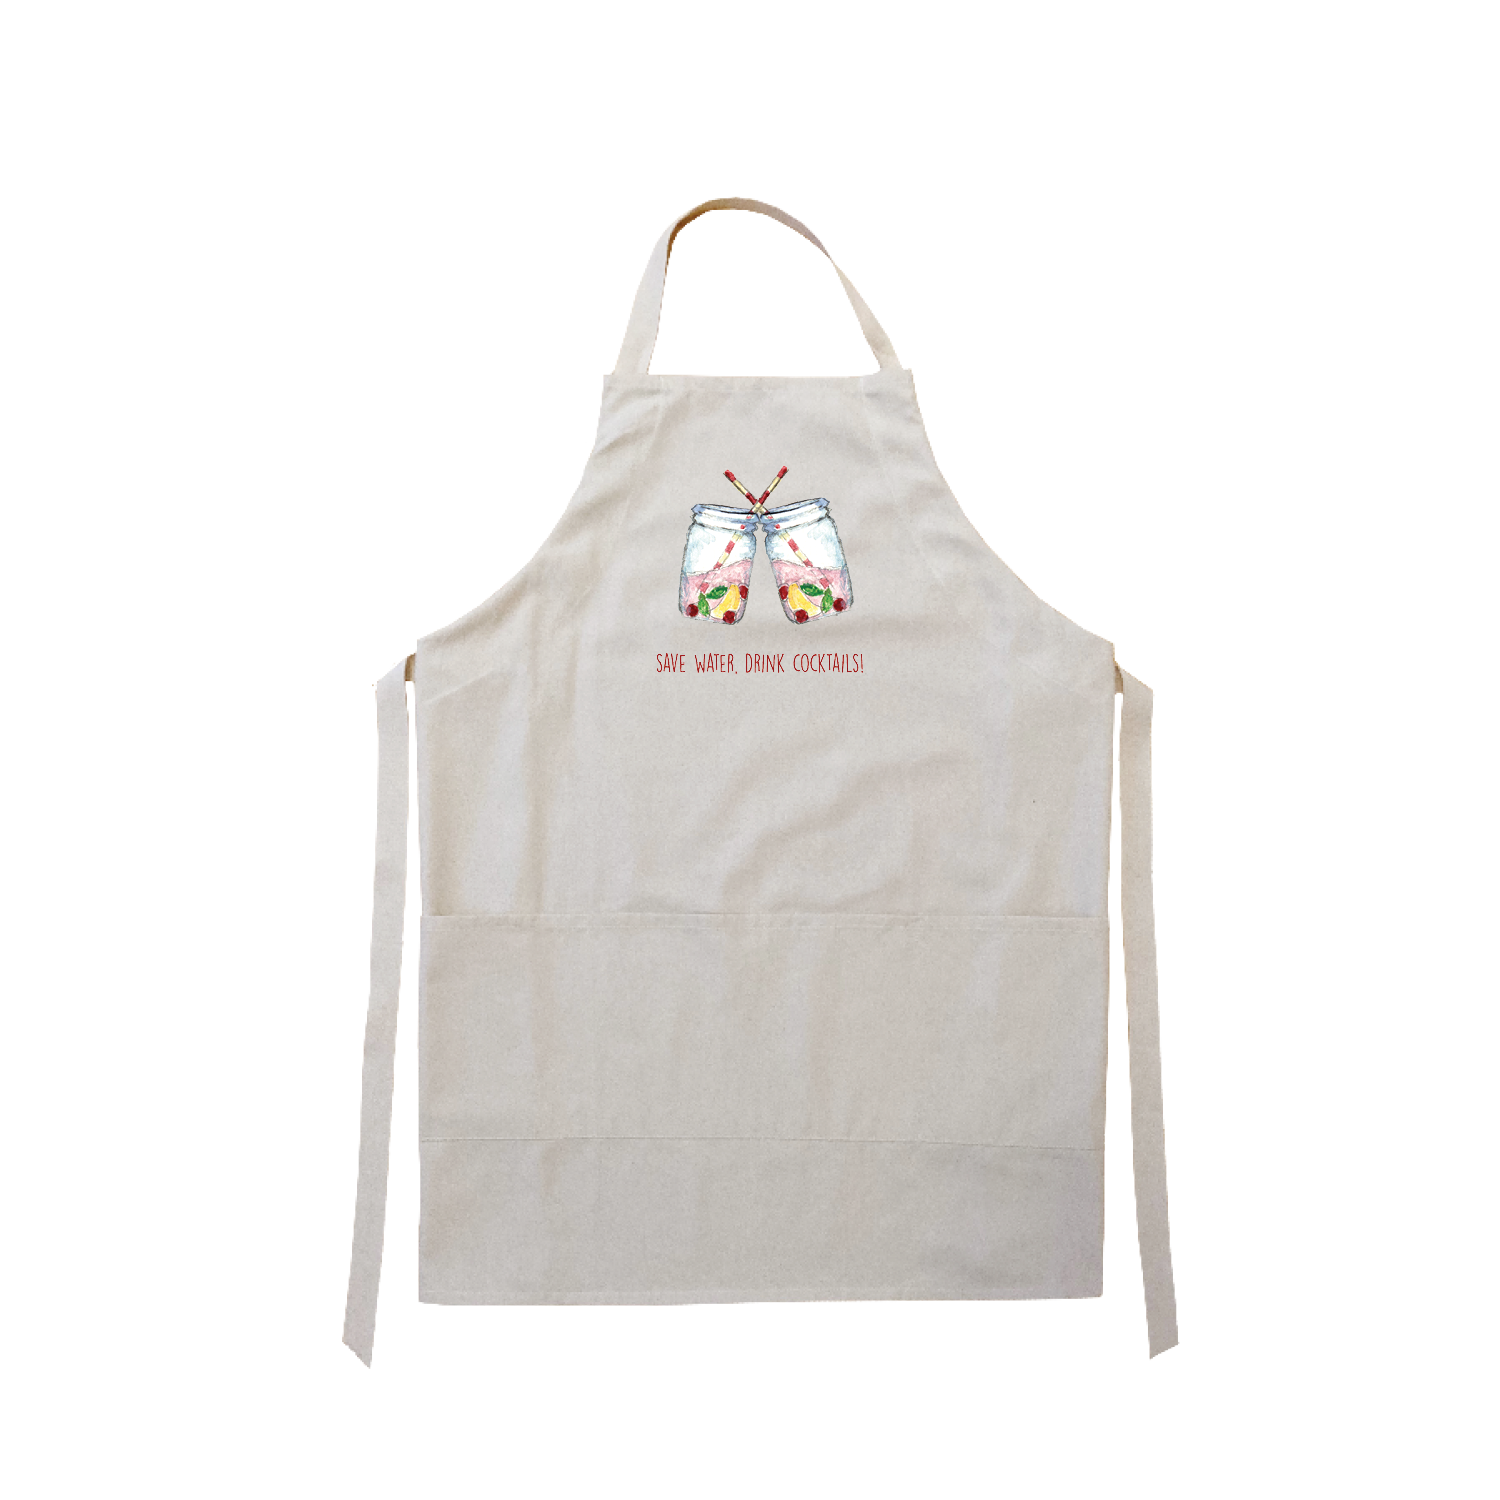 save water drink cocktails apron